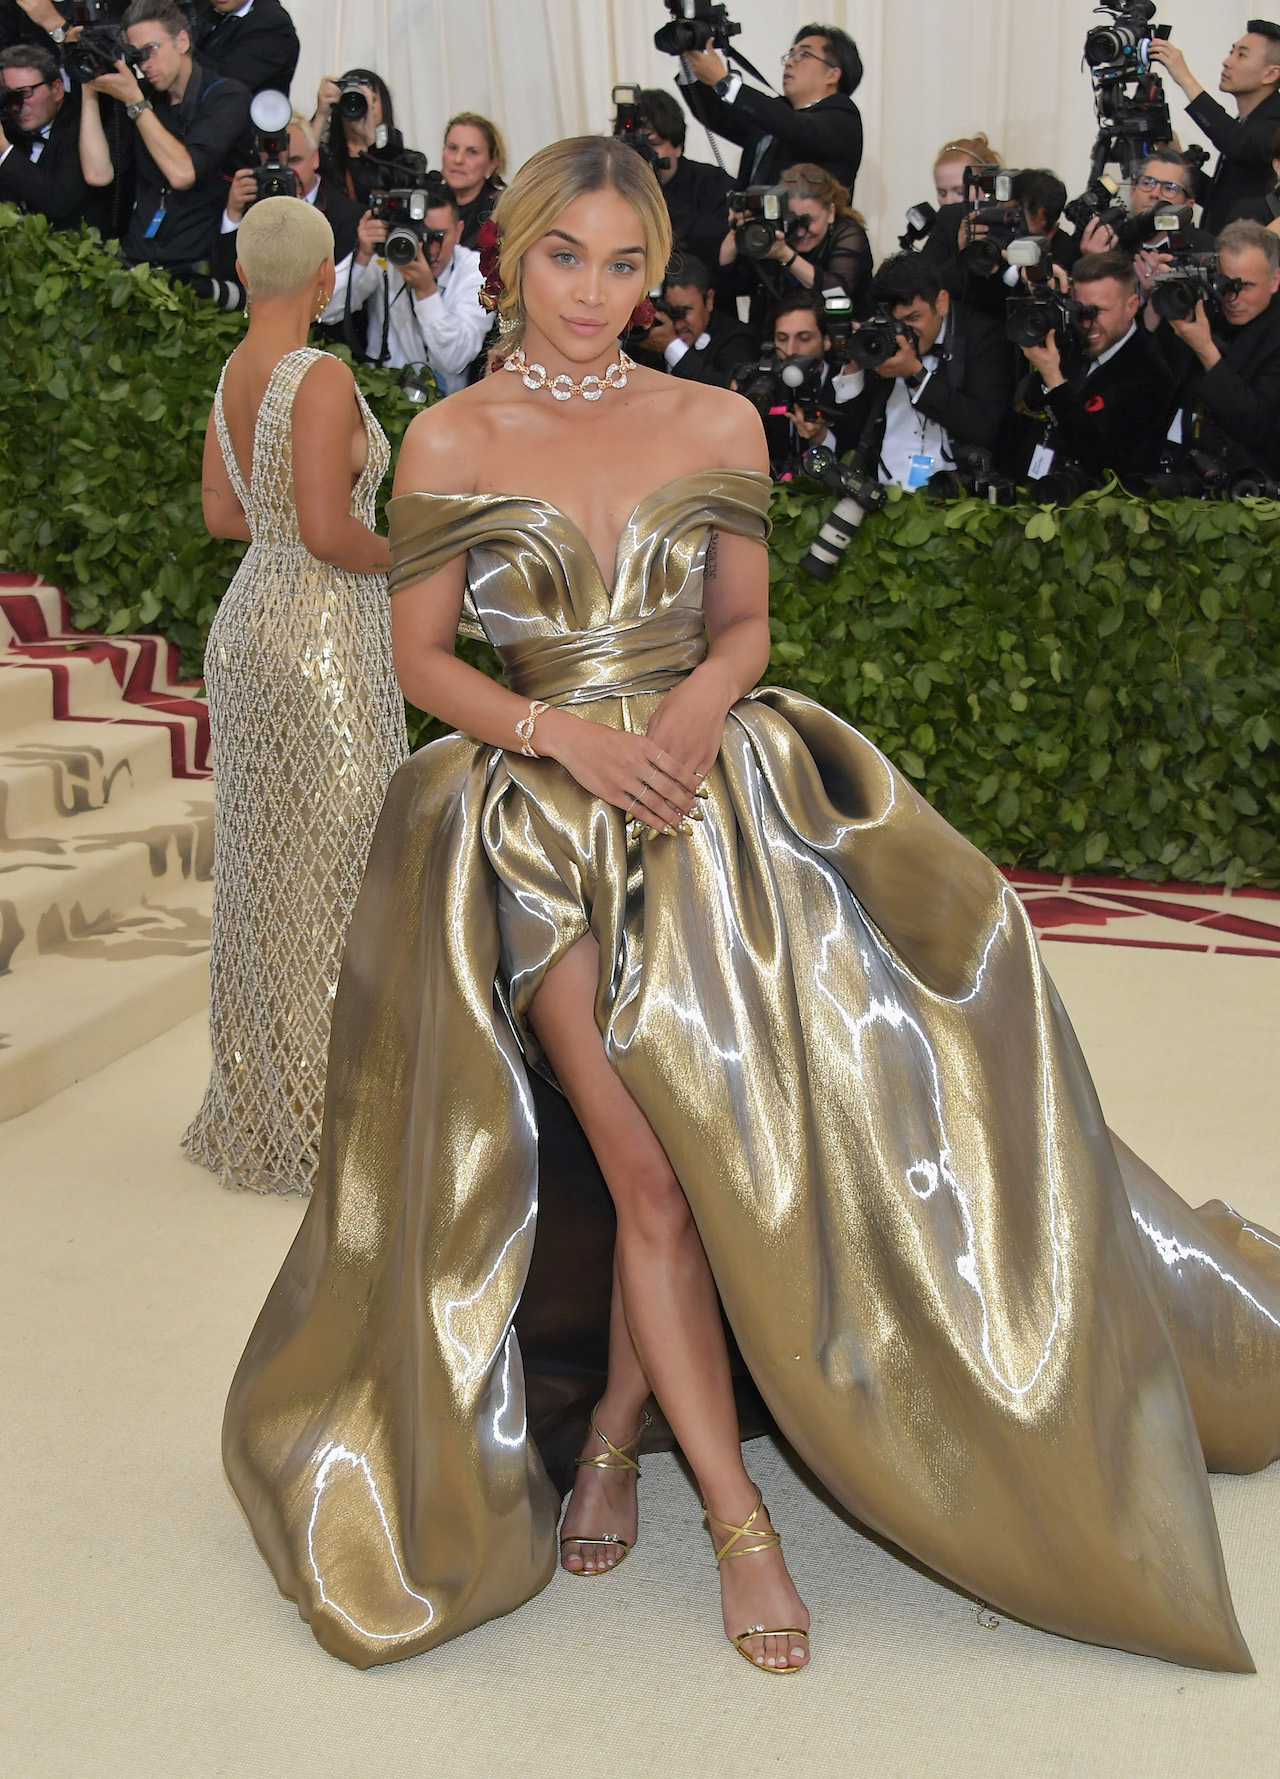 Model and actress Jasmine Sanders wore a voluminous gown of gold metal lamé. The gown was softly draped off the shoulder, then held by an elegant slim waist. The dress then released into a dramatic full silhouette, a high slit revealing Jasmine’s legs to emphasise the modern lightness. (Photo by Neilson Barnard/Getty Images)